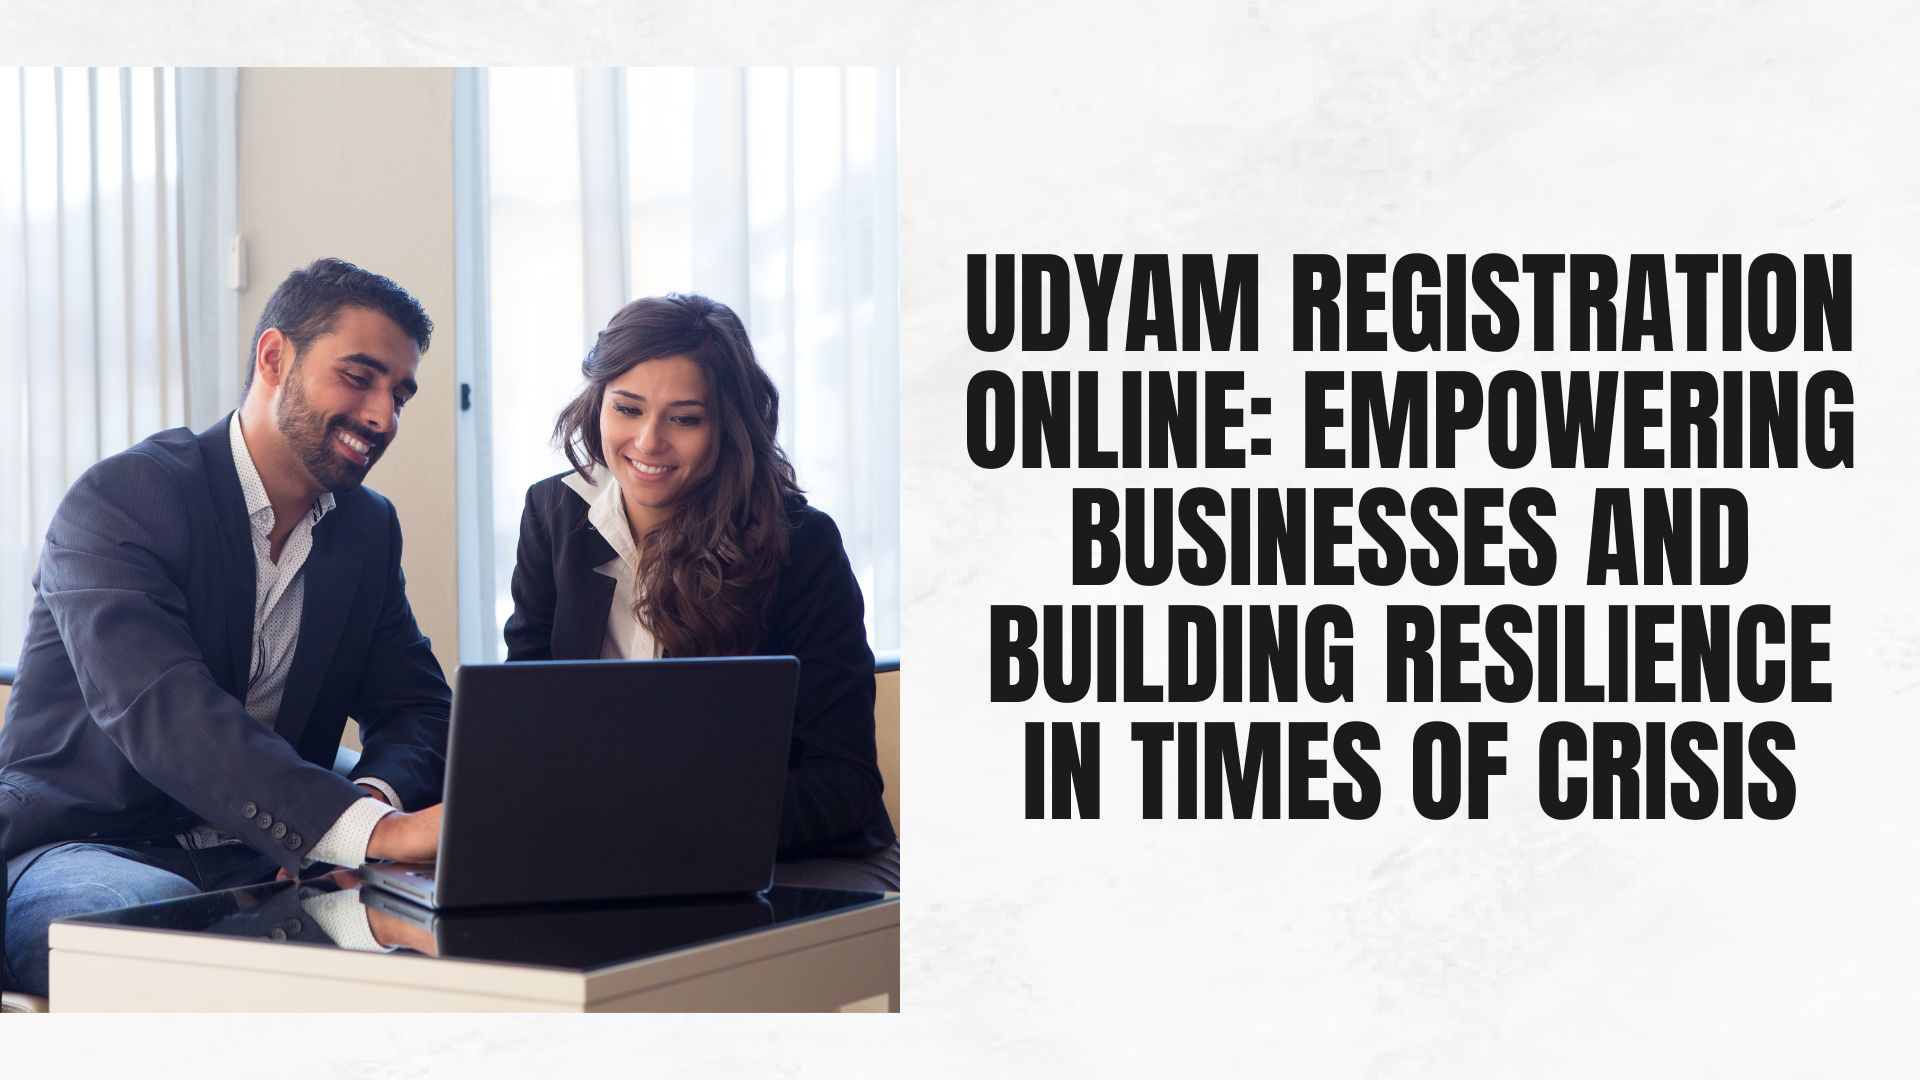 Udyam Registration Online: Empowering Businesses and Building Resilience in Times of Crisis